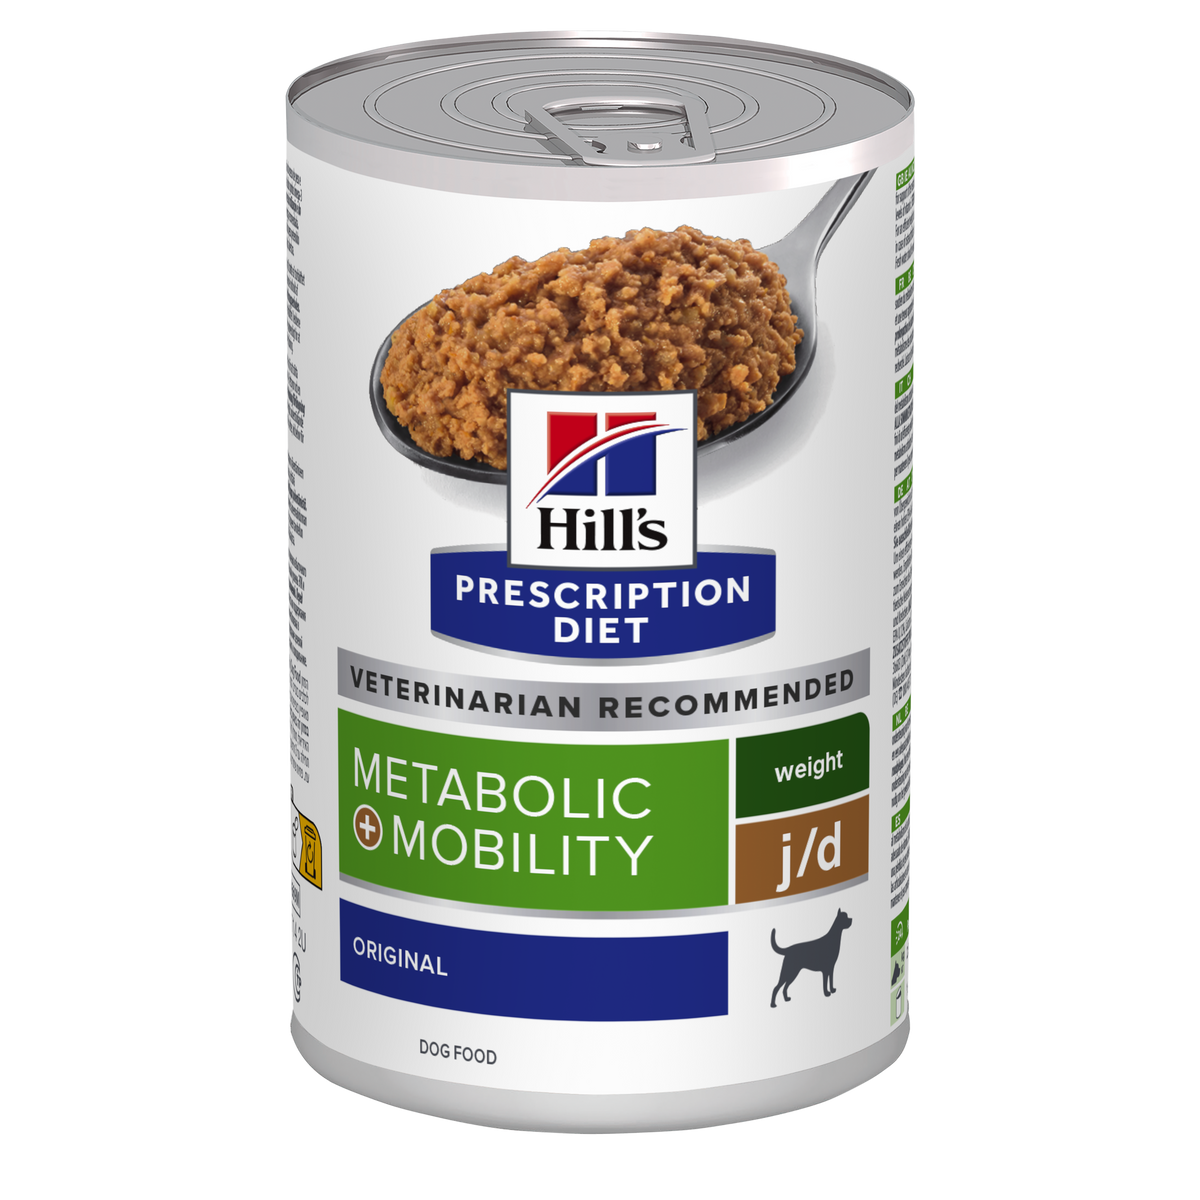 Hill's Prescription Diet Metabolic + Mobility Wet Dog Food